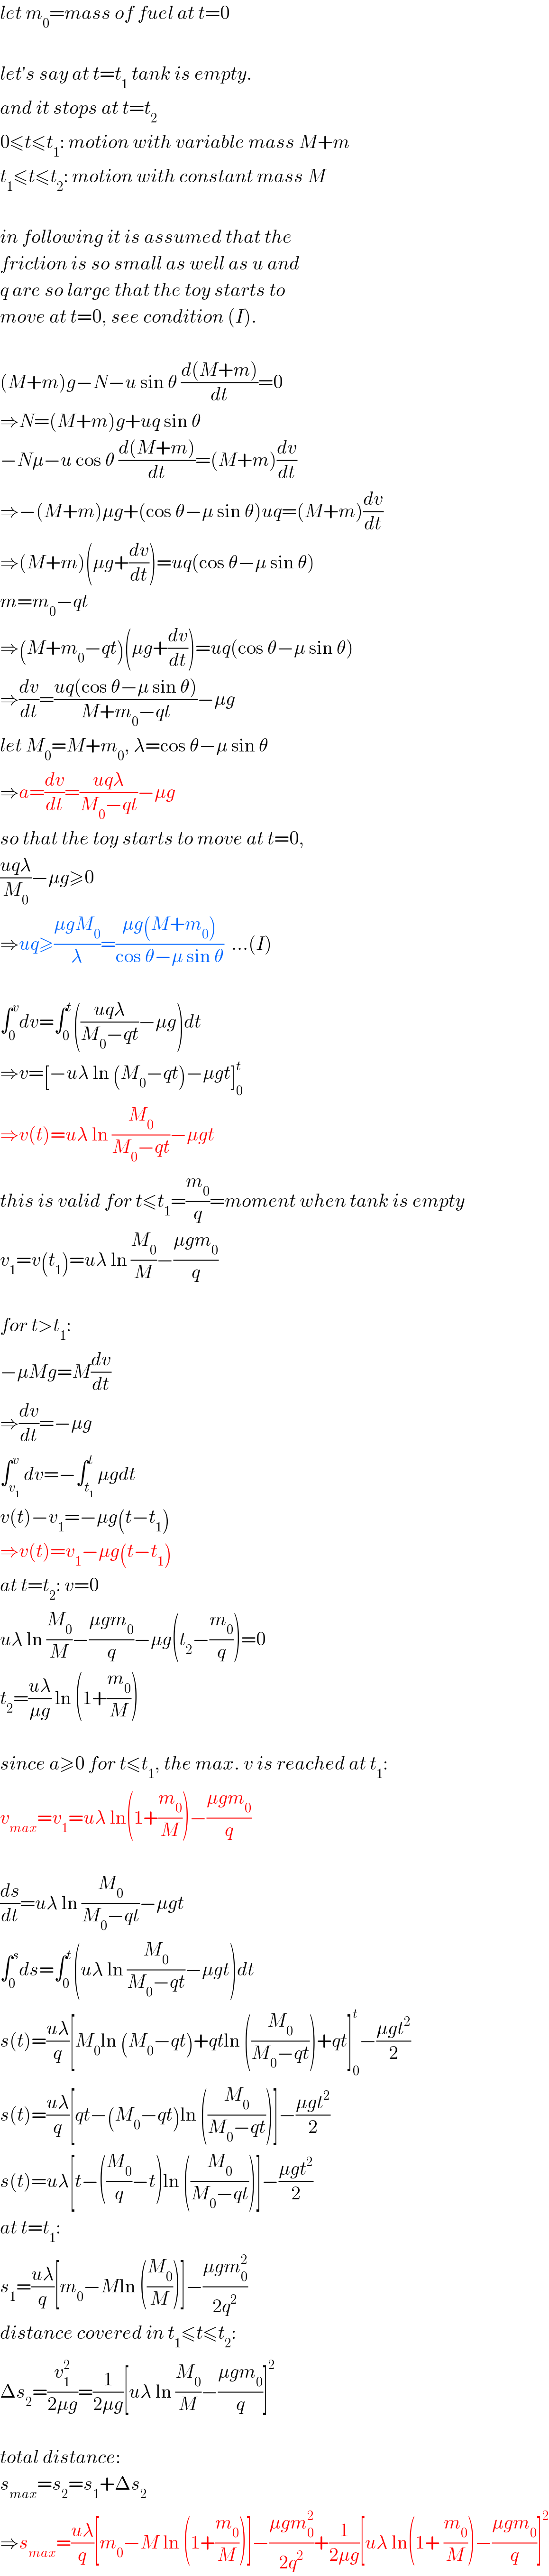 let m_0 =mass of fuel at t=0    let′s say at t=t_1  tank is empty.  and it stops at t=t_2   0≤t≤t_1 : motion with variable mass M+m  t_1 ≤t≤t_2 : motion with constant mass M    in following it is assumed that the  friction is so small as well as u and  q are so large that the toy starts to  move at t=0, see condition (I).    (M+m)g−N−u sin θ ((d(M+m))/dt)=0  ⇒N=(M+m)g+uq sin θ  −Nμ−u cos θ ((d(M+m))/dt)=(M+m)(dv/dt)  ⇒−(M+m)μg+(cos θ−μ sin θ)uq=(M+m)(dv/dt)  ⇒(M+m)(μg+(dv/dt))=uq(cos θ−μ sin θ)  m=m_0 −qt  ⇒(M+m_0 −qt)(μg+(dv/dt))=uq(cos θ−μ sin θ)  ⇒(dv/dt)=((uq(cos θ−μ sin θ))/(M+m_0 −qt))−μg  let M_0 =M+m_0 , λ=cos θ−μ sin θ  ⇒a=(dv/dt)=((uqλ)/(M_0 −qt))−μg  so that the toy starts to move at t=0,  ((uqλ)/M_0 )−μg≥0  ⇒uq≥((μgM_0 )/λ)=((μg(M+m_0 ))/(cos θ−μ sin θ))  ...(I)    ∫_0 ^v dv=∫_0 ^t (((uqλ)/(M_0 −qt))−μg)dt  ⇒v=[−uλ ln (M_0 −qt)−μgt]_0 ^t   ⇒v(t)=uλ ln (M_0 /(M_0 −qt))−μgt  this is valid for t≤t_1 =(m_0 /q)=moment when tank is empty  v_1 =v(t_1 )=uλ ln (M_0 /M)−((μgm_0 )/q)    for t>t_1 :  −μMg=M(dv/dt)  ⇒(dv/dt)=−μg  ∫_v_1  ^v dv=−∫_t_1  ^t μgdt  v(t)−v_1 =−μg(t−t_1 )  ⇒v(t)=v_1 −μg(t−t_1 )  at t=t_2 : v=0  uλ ln (M_0 /M)−((μgm_0 )/q)−μg(t_2 −(m_0 /q))=0  t_2 =((uλ)/(μg)) ln (1+(m_0 /M))    since a≥0 for t≤t_1 , the max. v is reached at t_1 :  v_(max) =v_1 =uλ ln(1+(m_0 /M))−((μgm_0 )/q)    (ds/dt)=uλ ln (M_0 /(M_0 −qt))−μgt  ∫_0 ^s ds=∫_0 ^t (uλ ln (M_0 /(M_0 −qt))−μgt)dt  s(t)=((uλ)/q)[M_0 ln (M_0 −qt)+qtln ((M_0 /(M_0 −qt)))+qt]_0 ^t −((μgt^2 )/2)  s(t)=((uλ)/q)[qt−(M_0 −qt)ln ((M_0 /(M_0 −qt)))]−((μgt^2 )/2)  s(t)=uλ[t−((M_0 /q)−t)ln ((M_0 /(M_0 −qt)))]−((μgt^2 )/2)  at t=t_1 :  s_1 =((uλ)/q)[m_0 −Mln ((M_0 /M))]−((μgm_0 ^2 )/(2q^2 ))  distance covered in t_1 ≤t≤t_2 :  Δs_2 =(v_1 ^2 /(2μg))=(1/(2μg))[uλ ln (M_0 /M)−((μgm_0 )/q)]^2     total distance:  s_(max) =s_2 =s_1 +Δs_2   ⇒s_(max) =((uλ)/q)[m_0 −M ln (1+(m_0 /M))]−((μgm_0 ^2 )/(2q^2 ))+(1/(2μg))[uλ ln(1+ (m_0 /M))−((μgm_0 )/q)]^2   